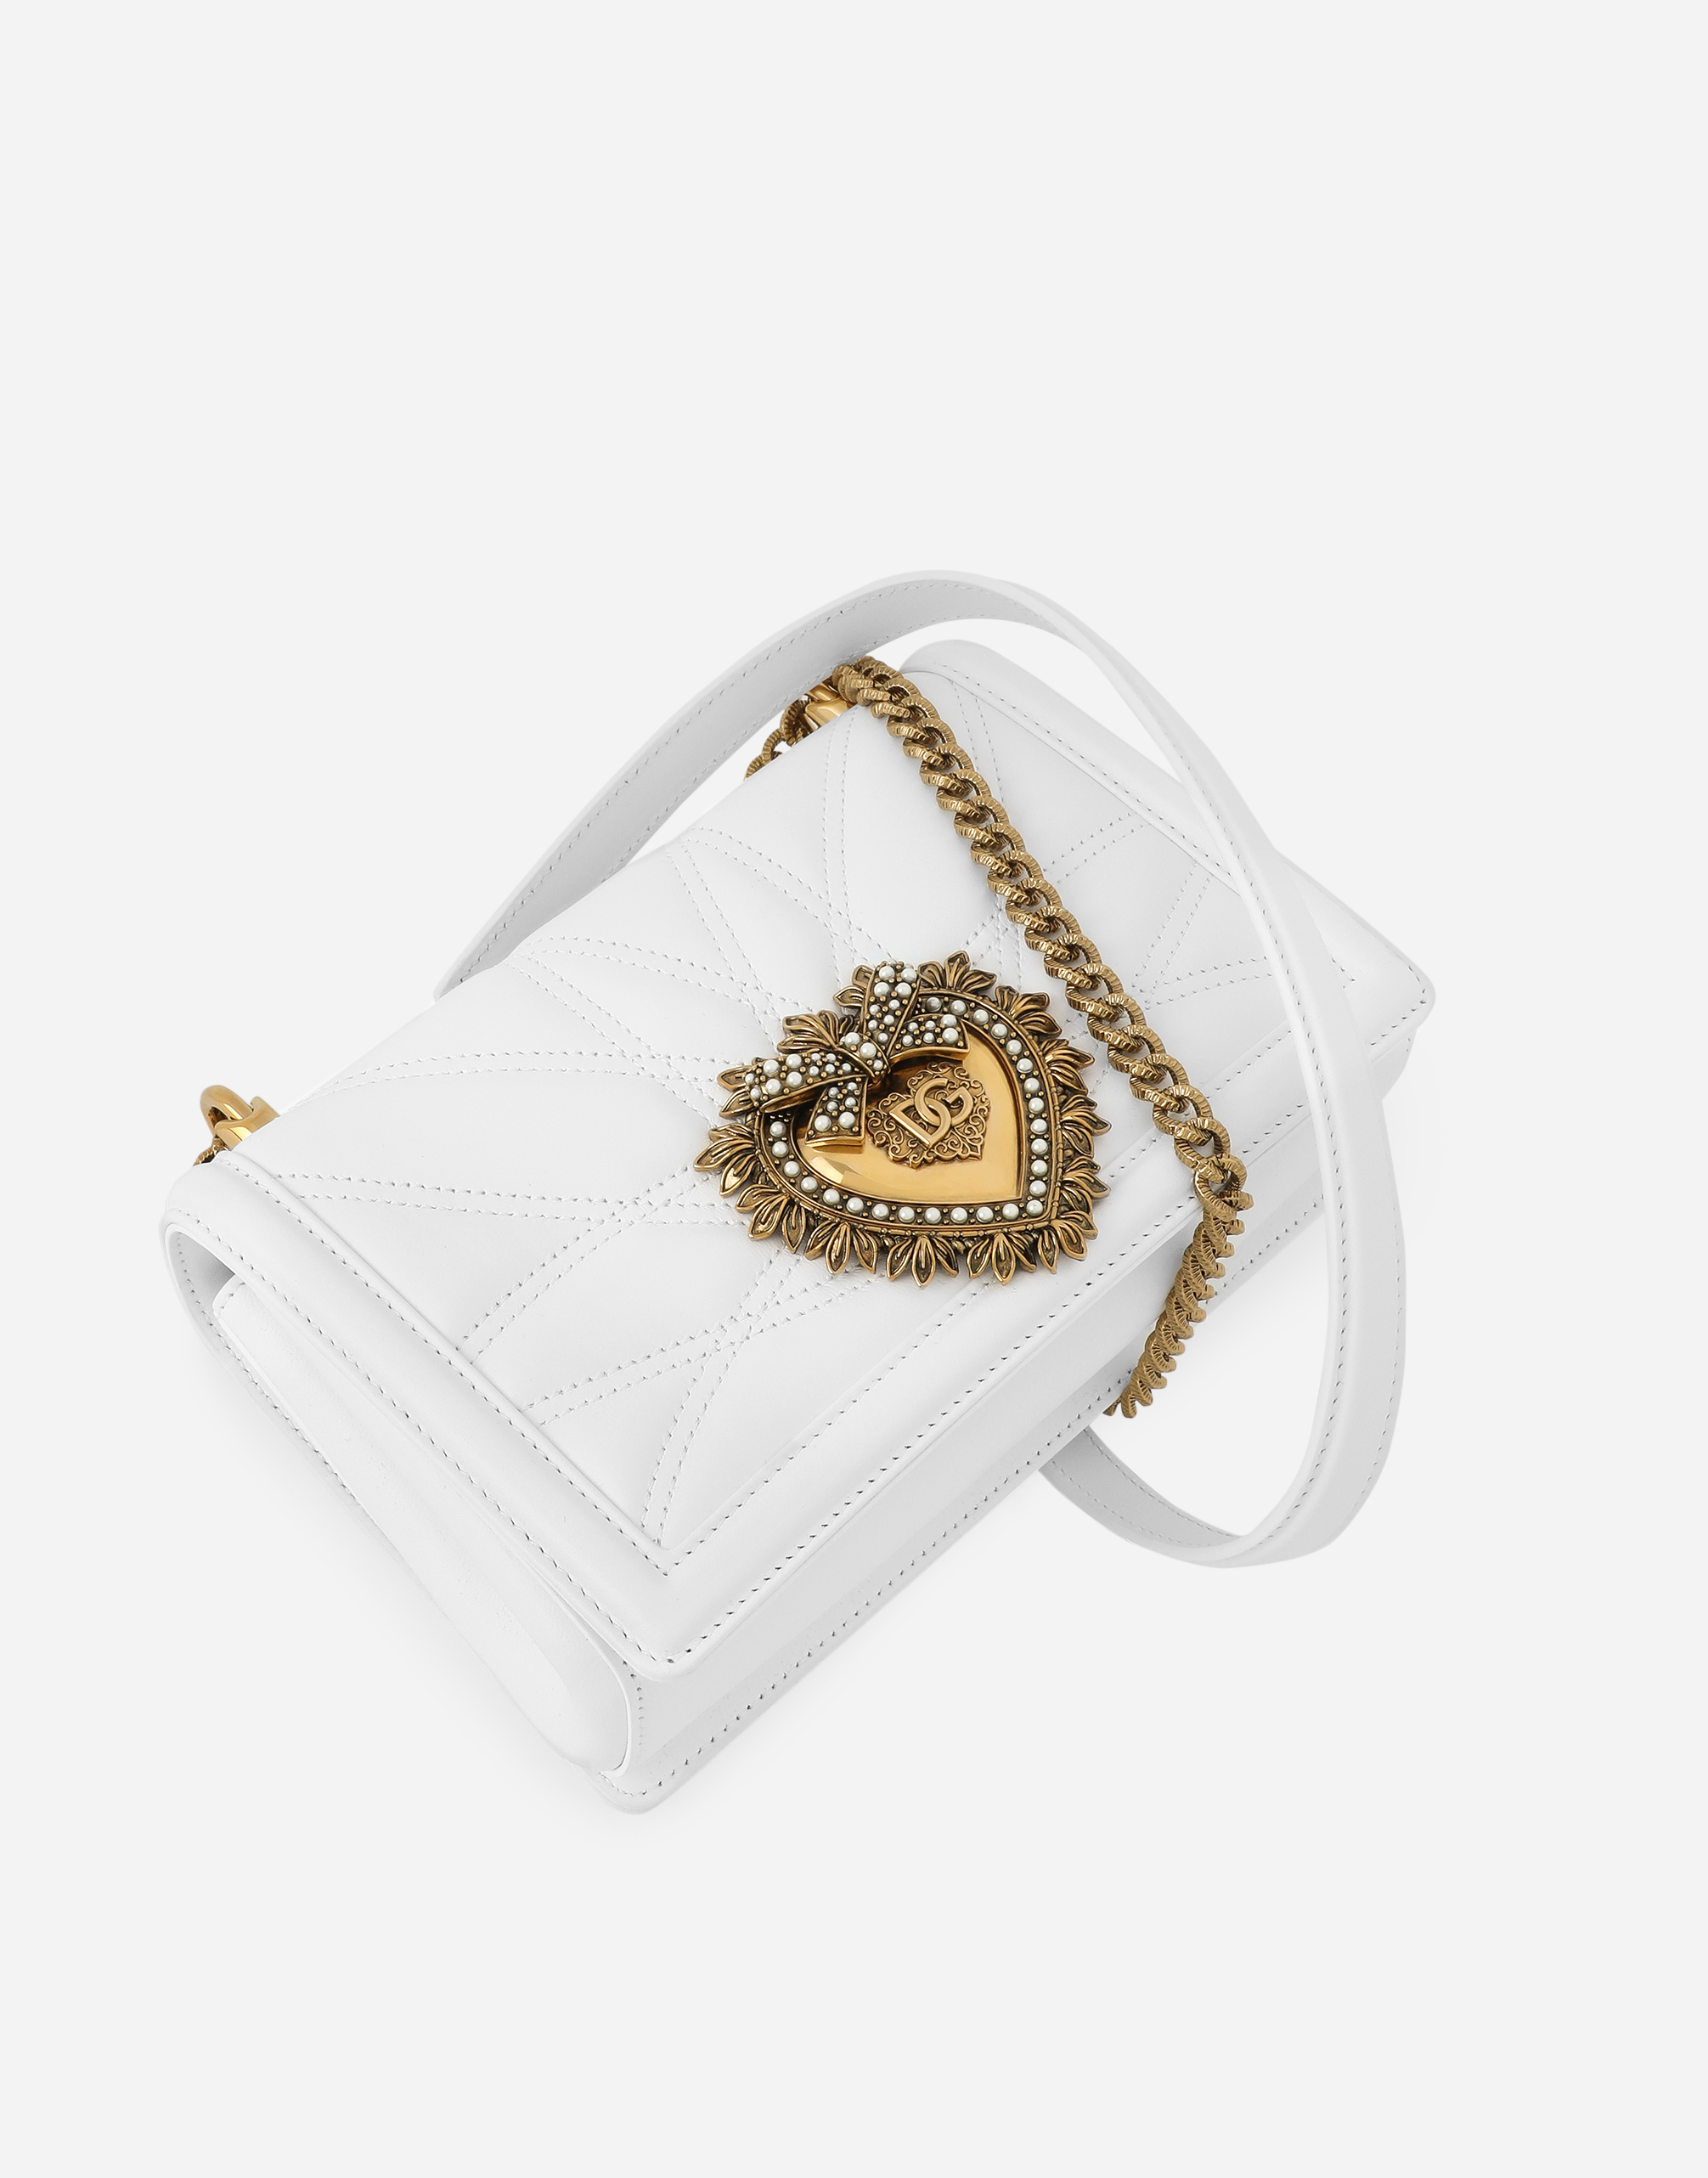 Dolce & Gabbana - The medium-sized white Devotion bag is embellished with  the exclusive bejewelled heart fastening. As a part of the Amore for  Scientific Research project, proceeds from online sales will